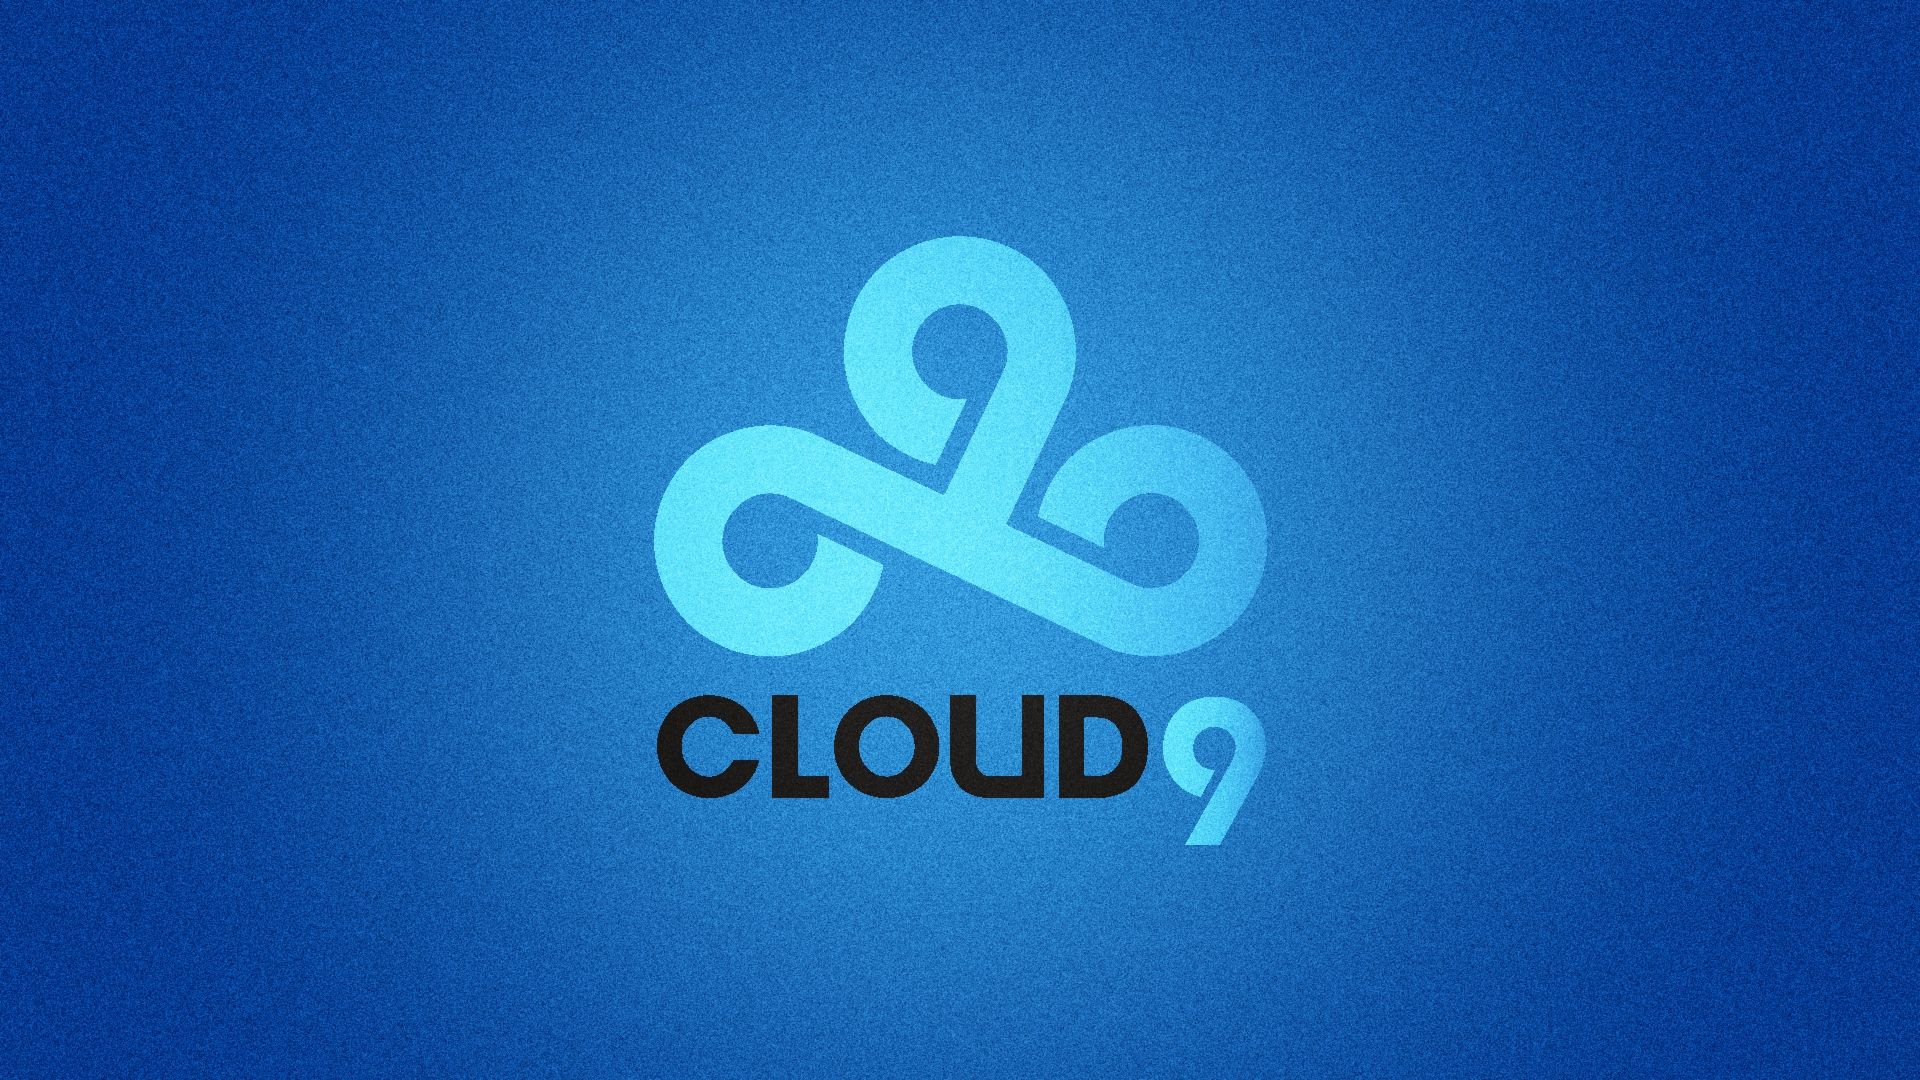 Cloud 9 Background Inspirational C9 Cloud9 Wallpaper HD Desktop and Mobile Background for You of The Hudson